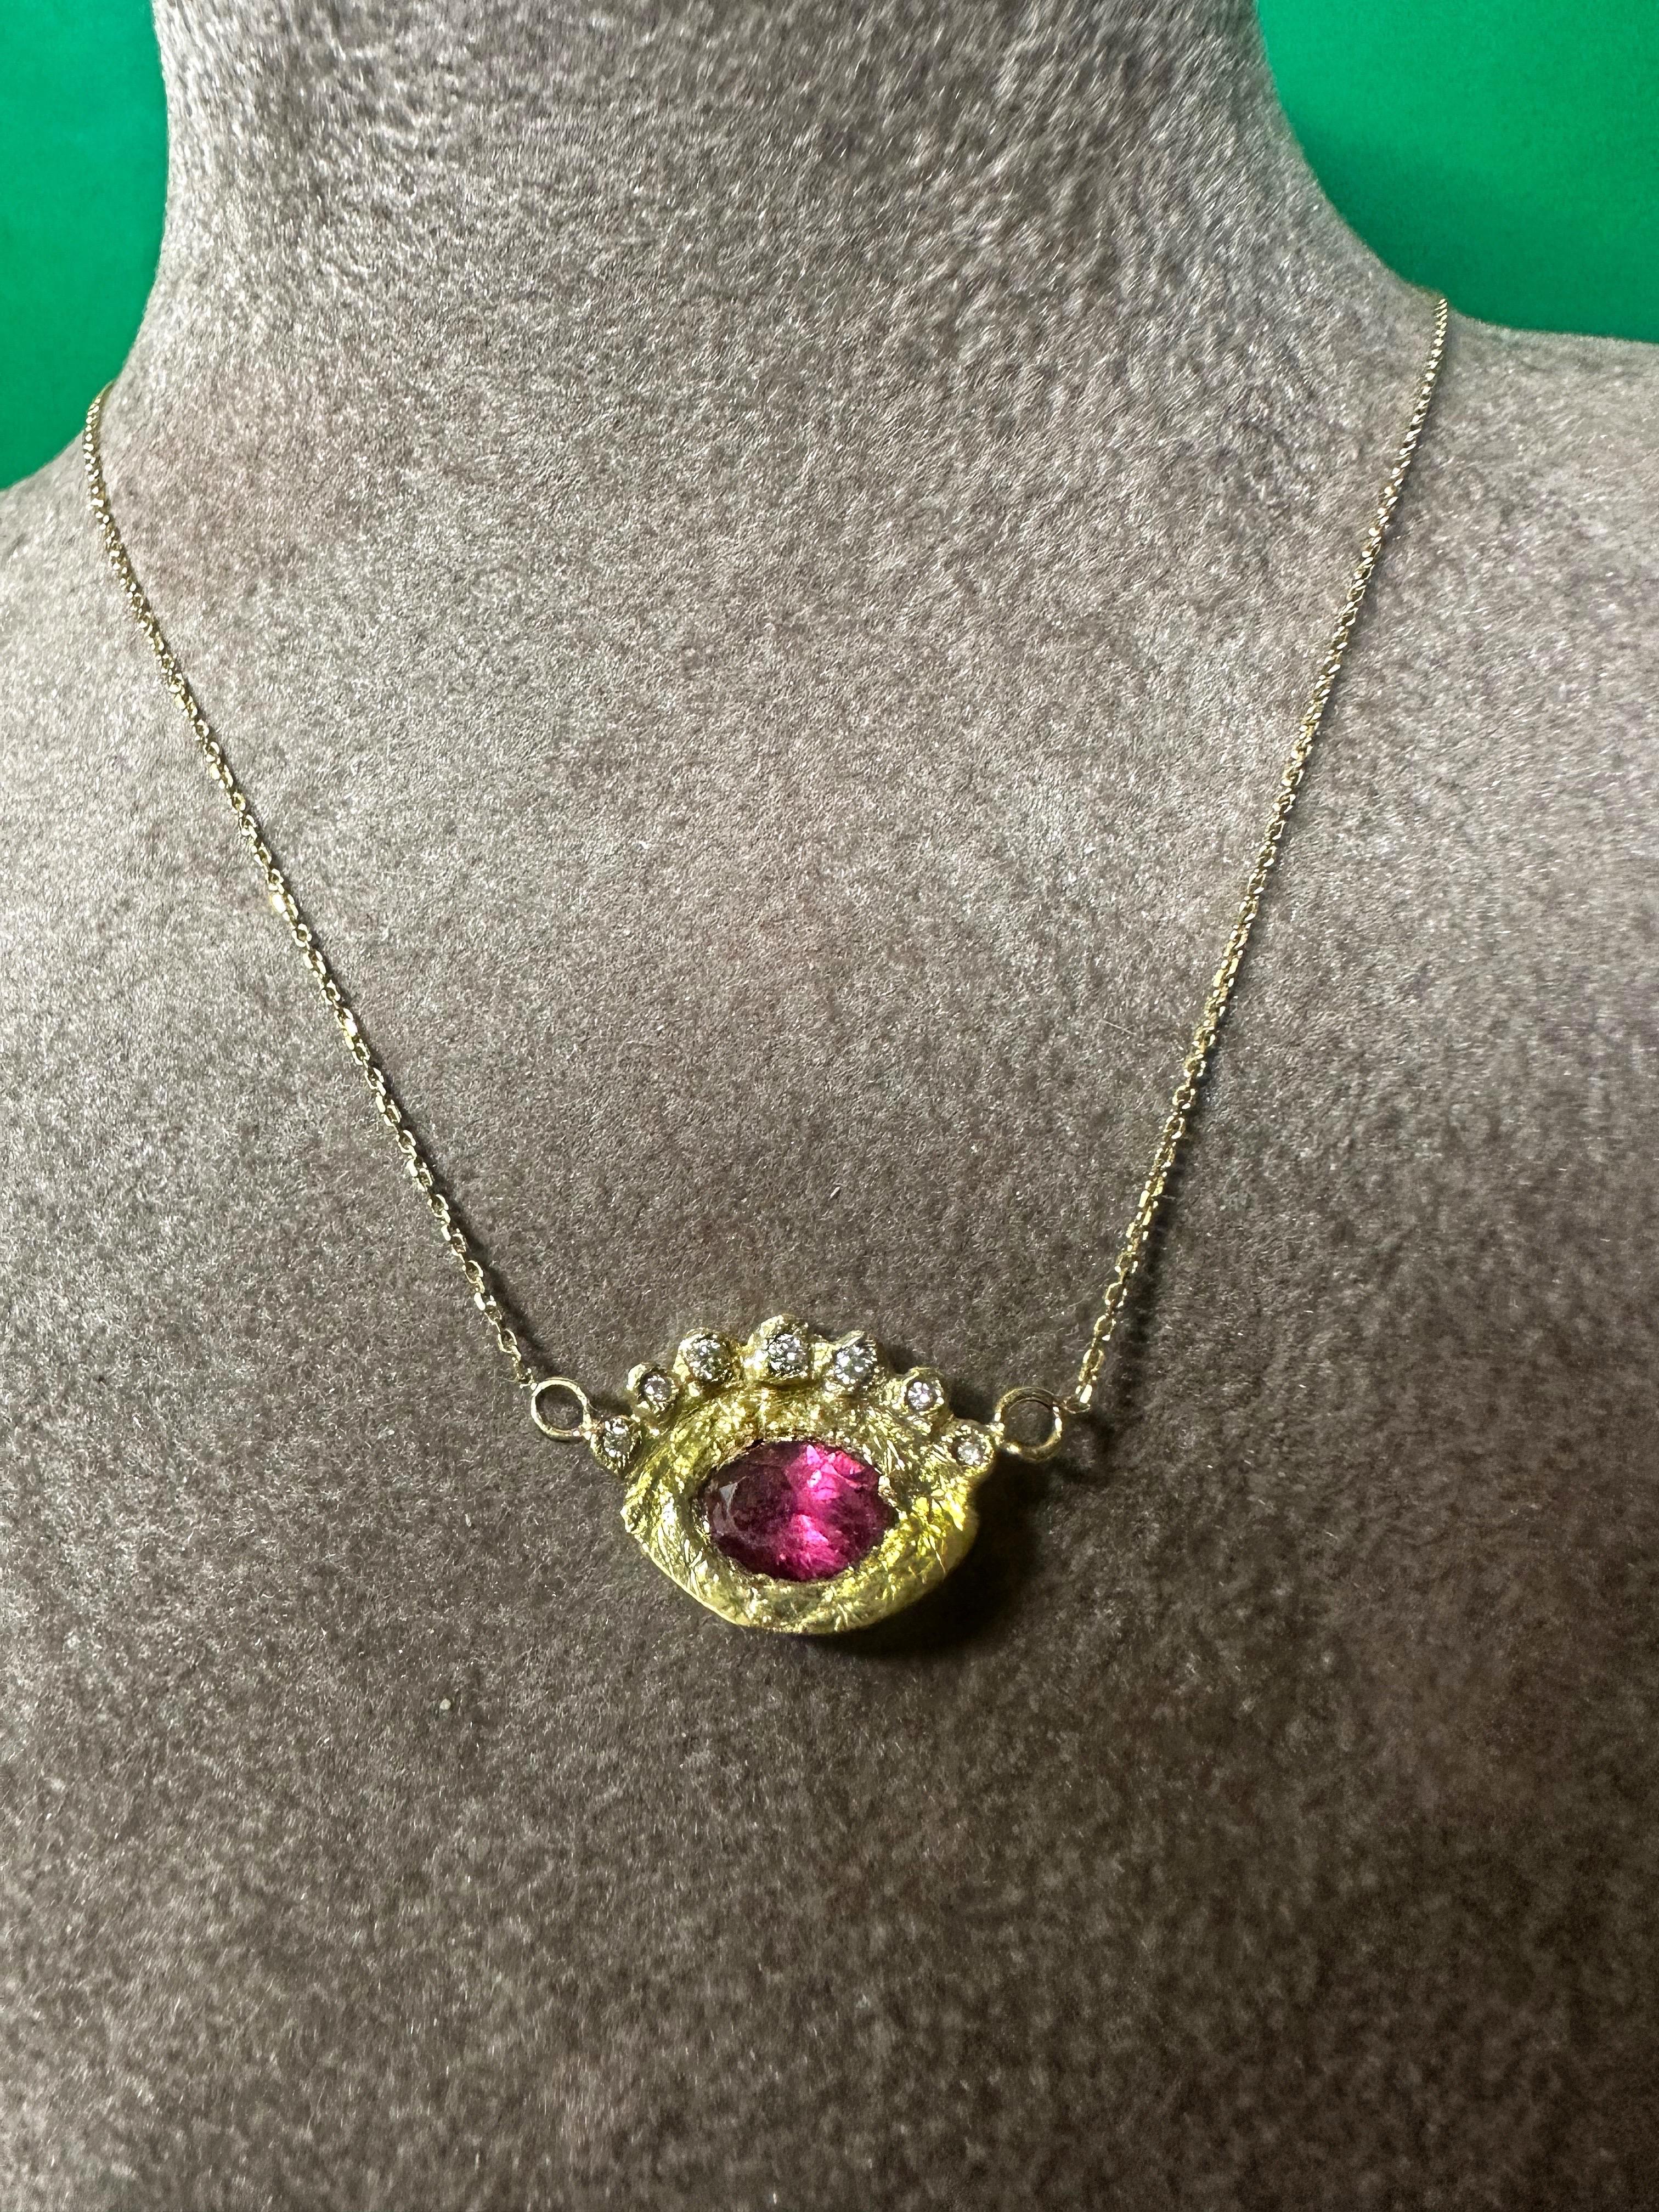 Hera’s Eye Rubellite Tourmaline with Diamonds Necklace in Gold in stock For Sale 1